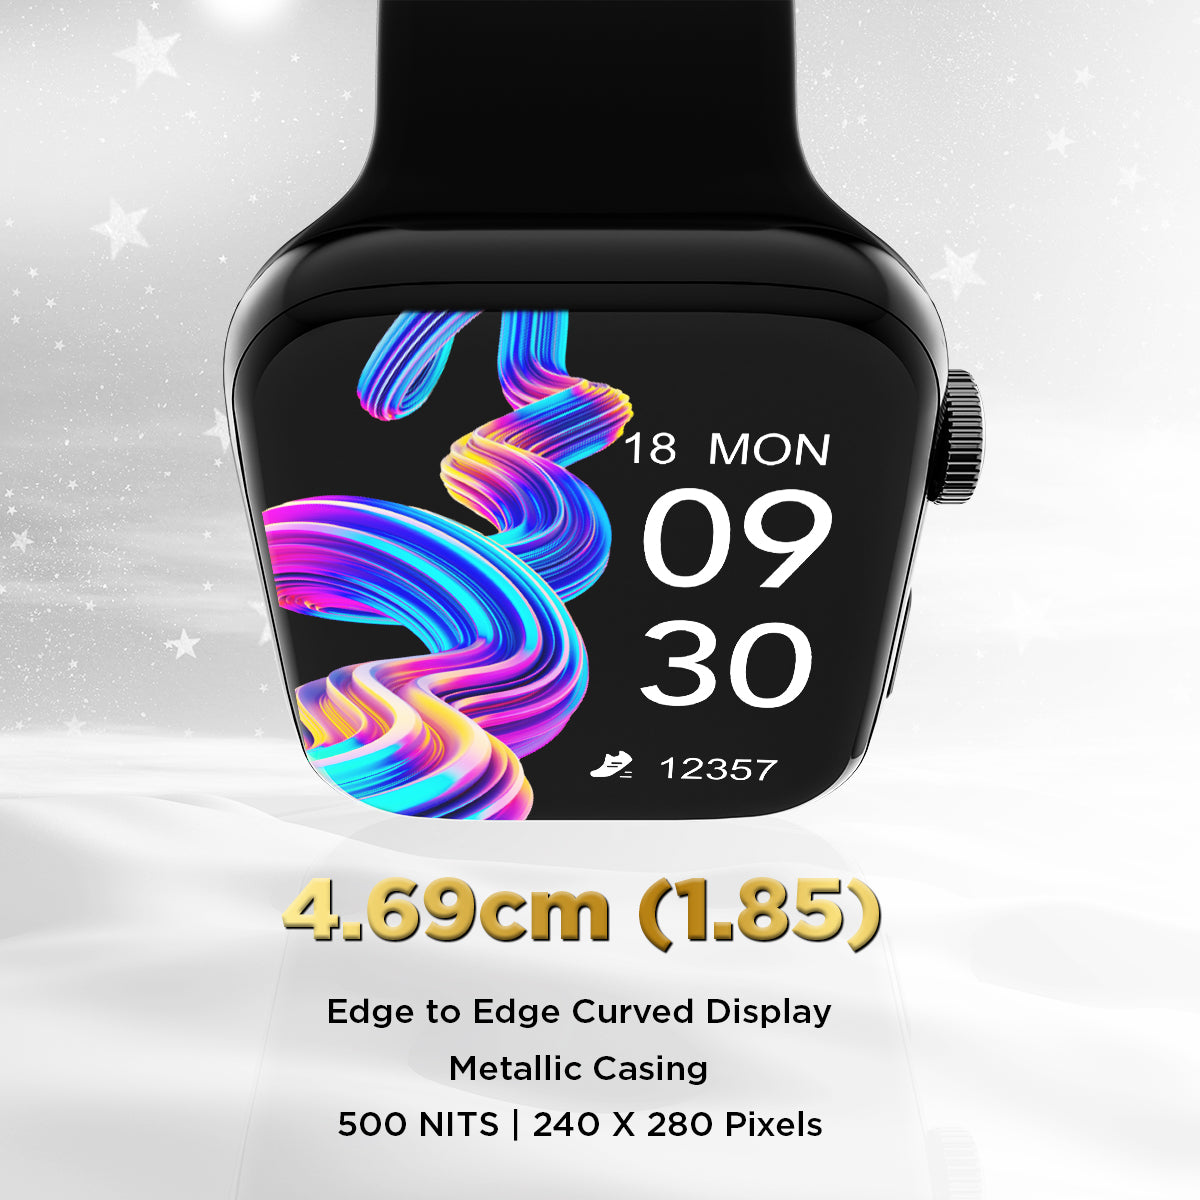 GIZMORE Star 1.85 inch (4.69 cm) IPS Large Display with Rotating Crown Controls| AI Voice Assistant | Bluetooth Calling Smartwatch